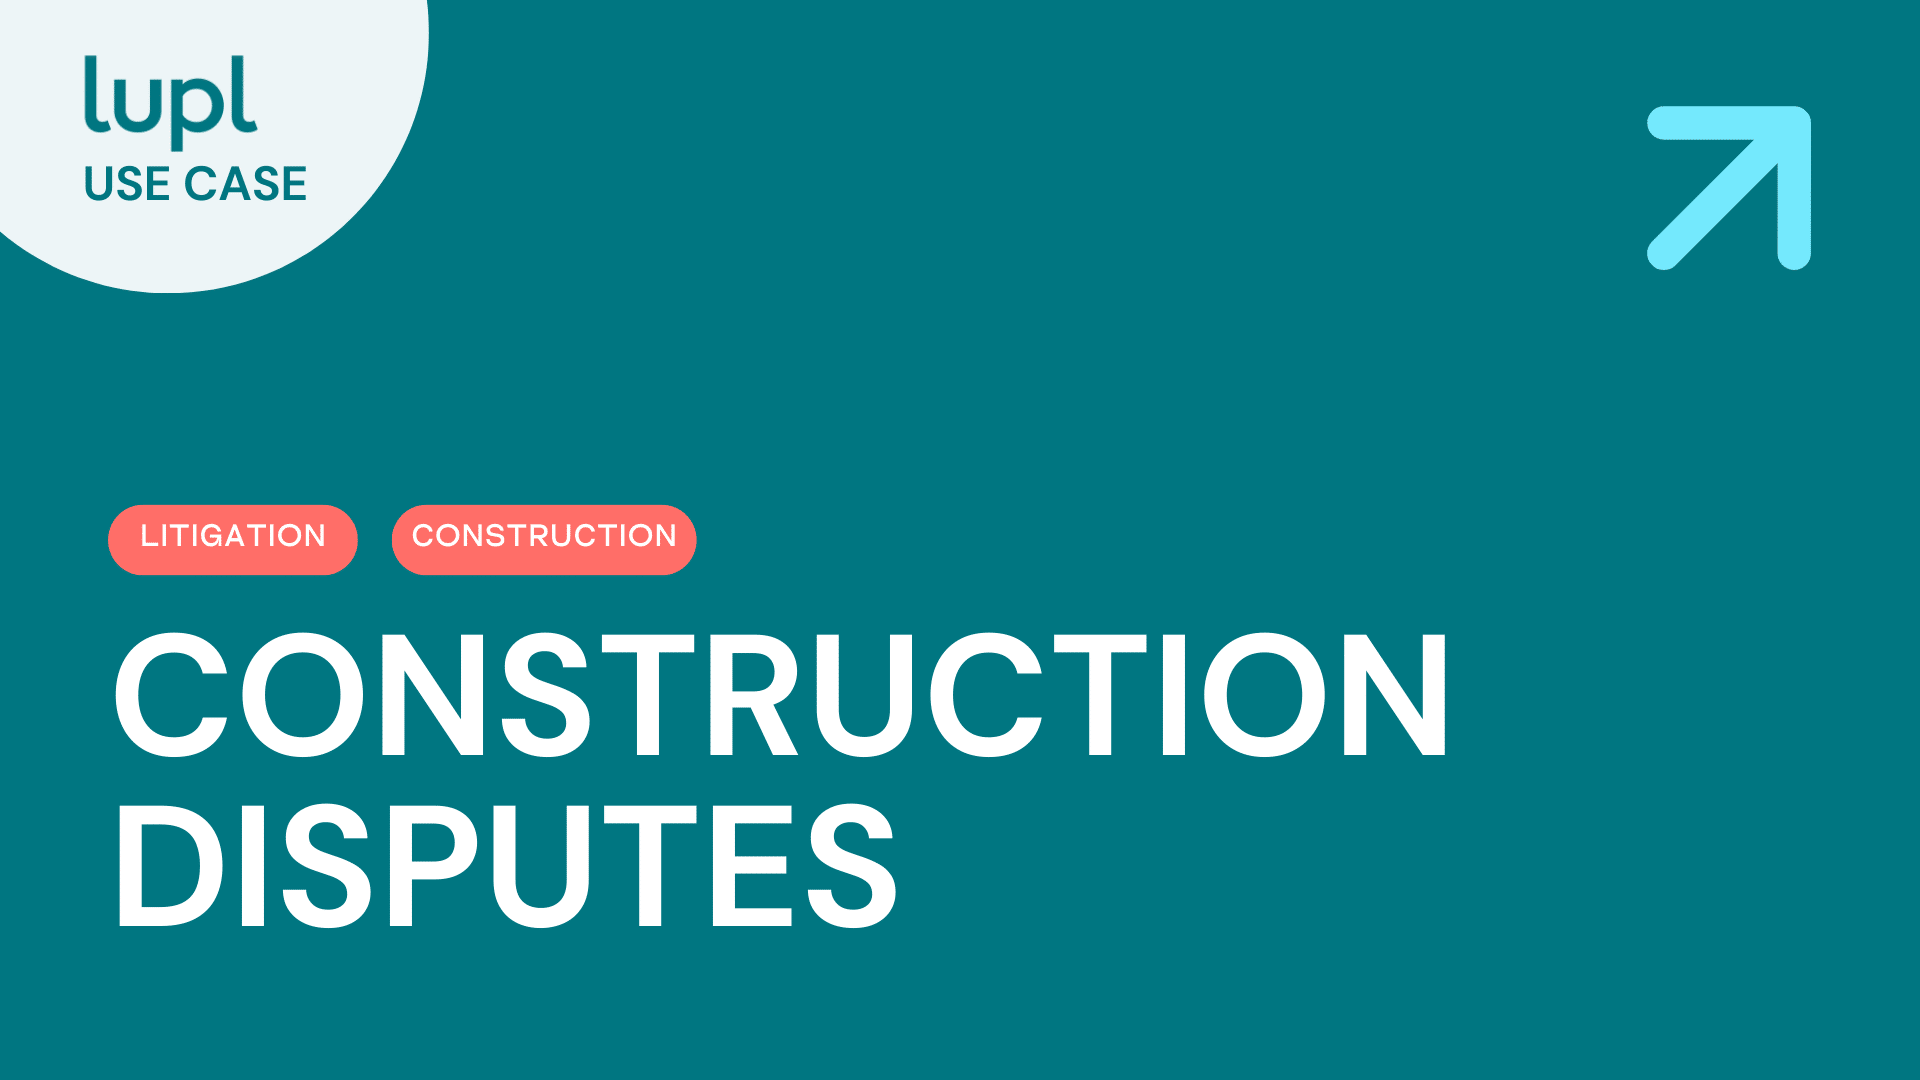 Use Lupl to manage your construction dispute matters